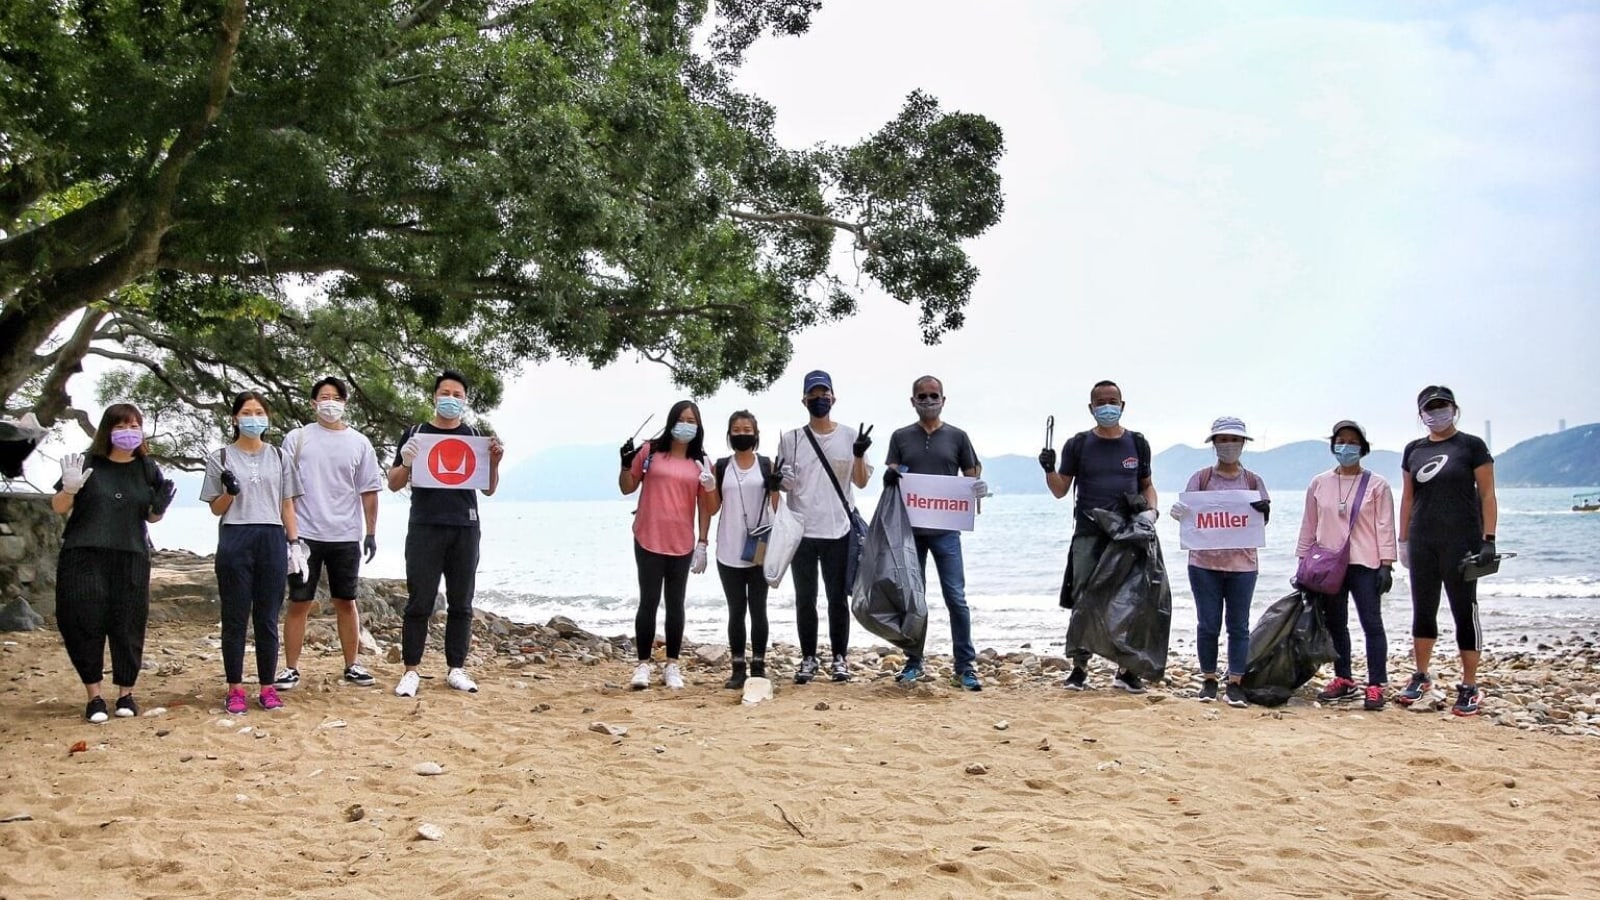 Twelve people are standing together on a beach holding trash bags that appear full with trash collected from the surrounding beach area.Twelve people are standing together on a beach holding trash bags that appear full with trash collected from the surrounding beach area.